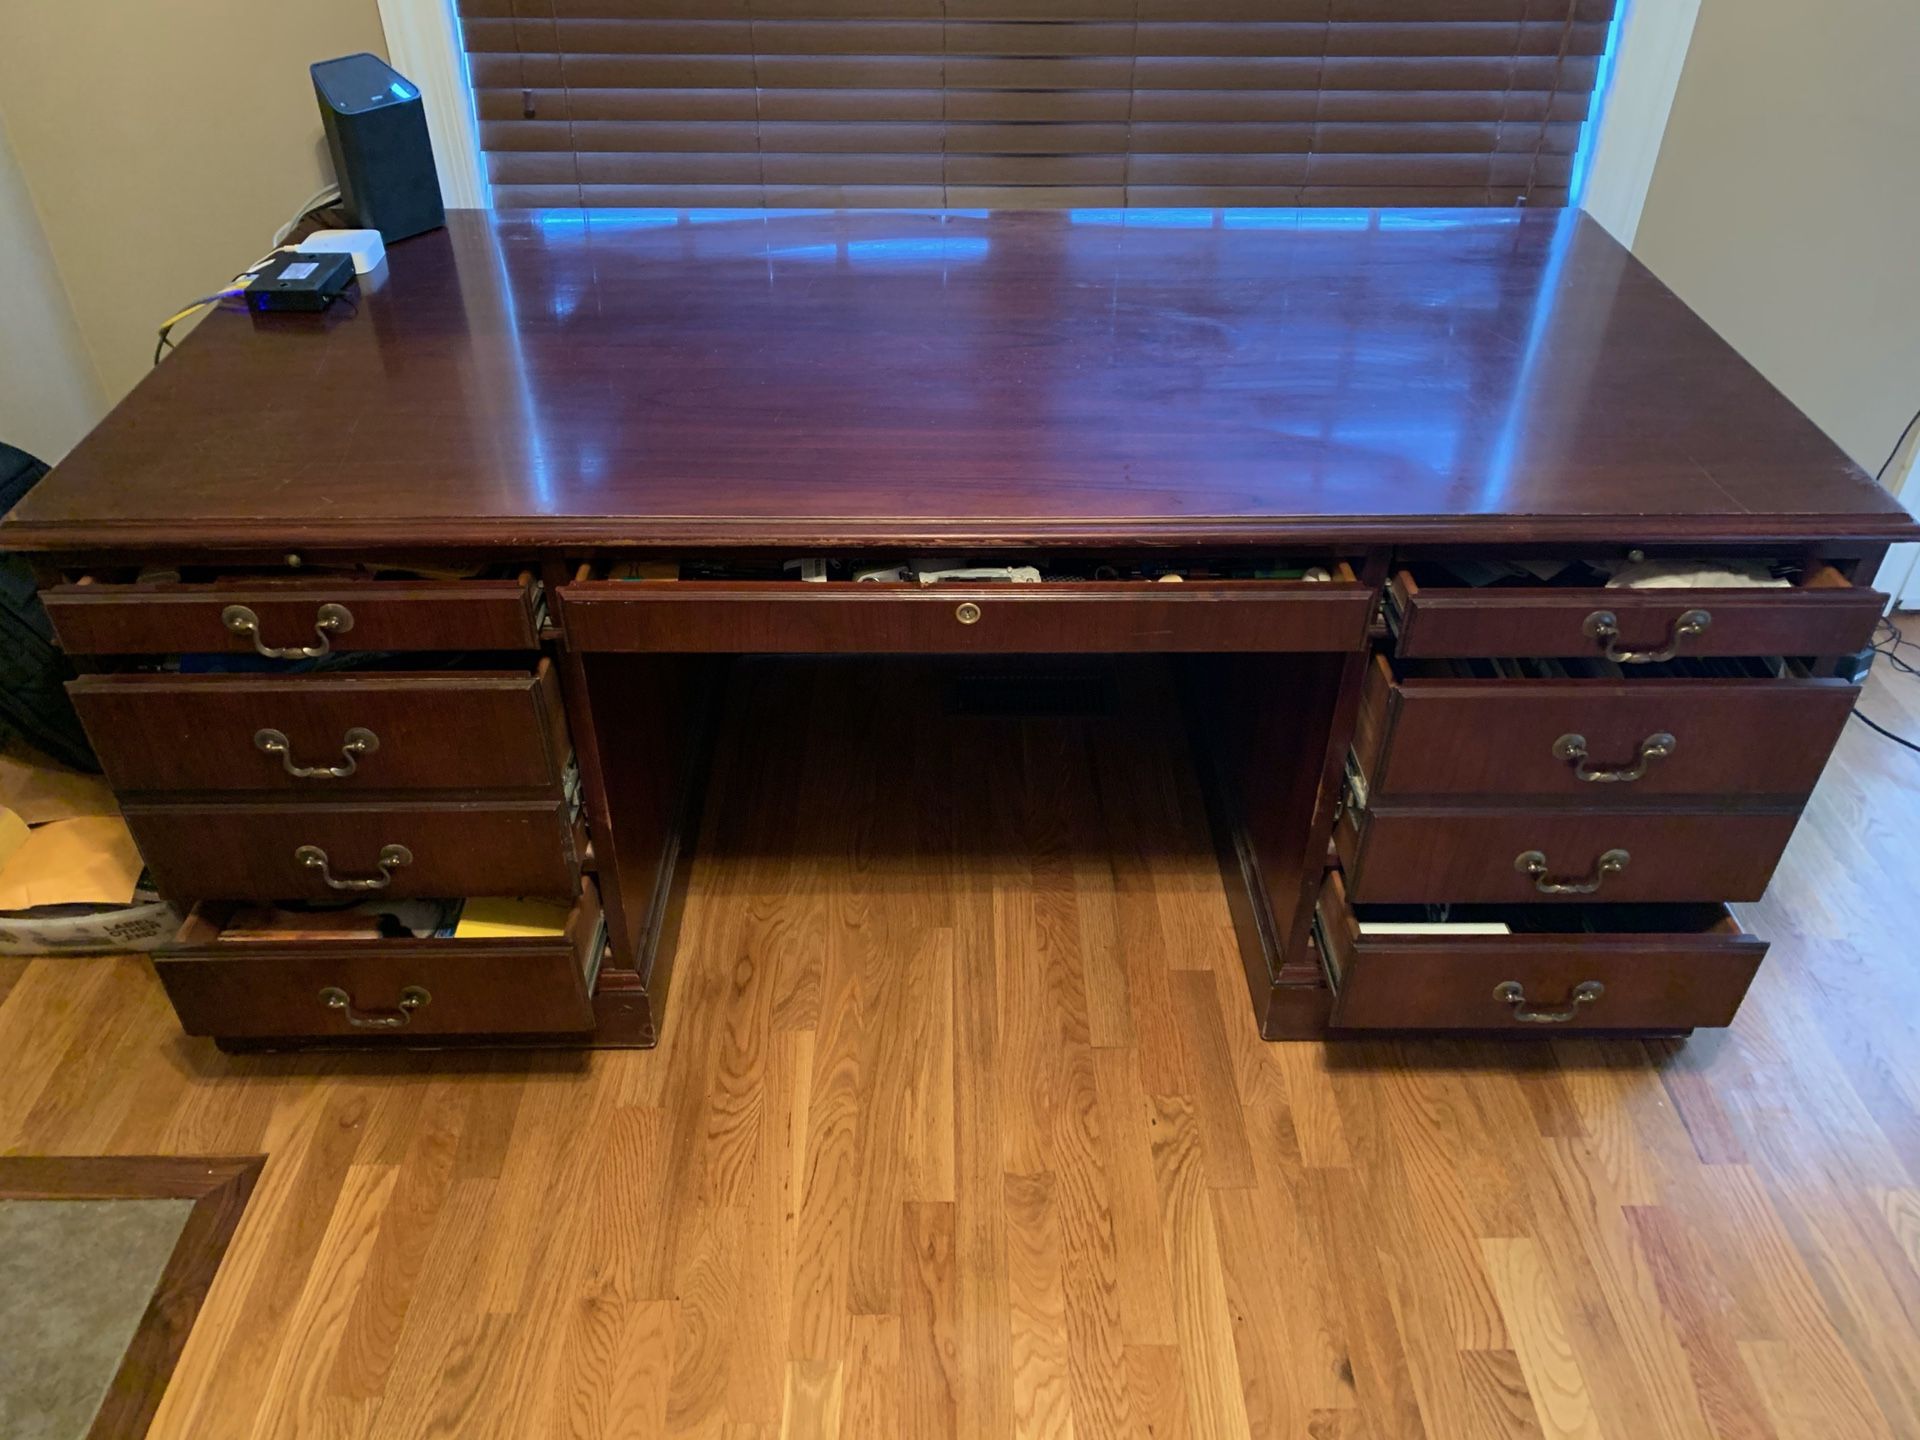 Large executive desk. Very solid construction with some wear on top but still a very nice desk. All drawers function properly.